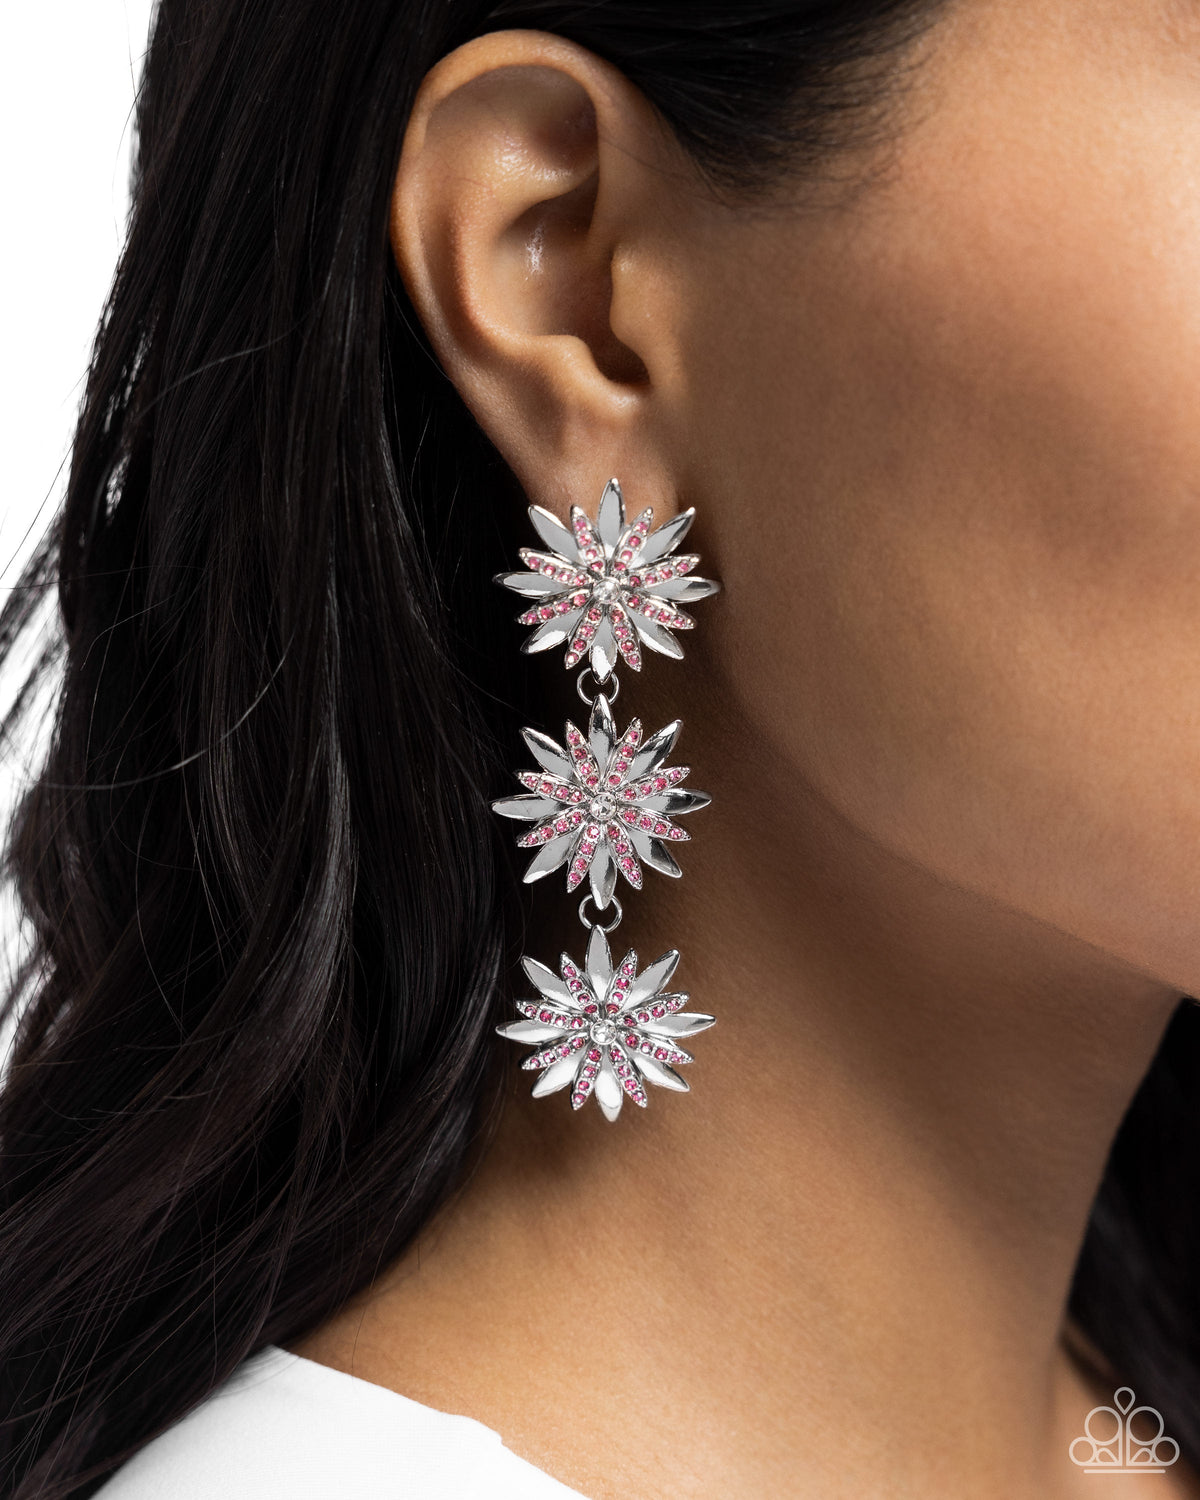 Petaled Princess Pink Rhinestone Floral Earrings - Paparazzi Accessories-on model - CarasShop.com - $5 Jewelry by Cara Jewels